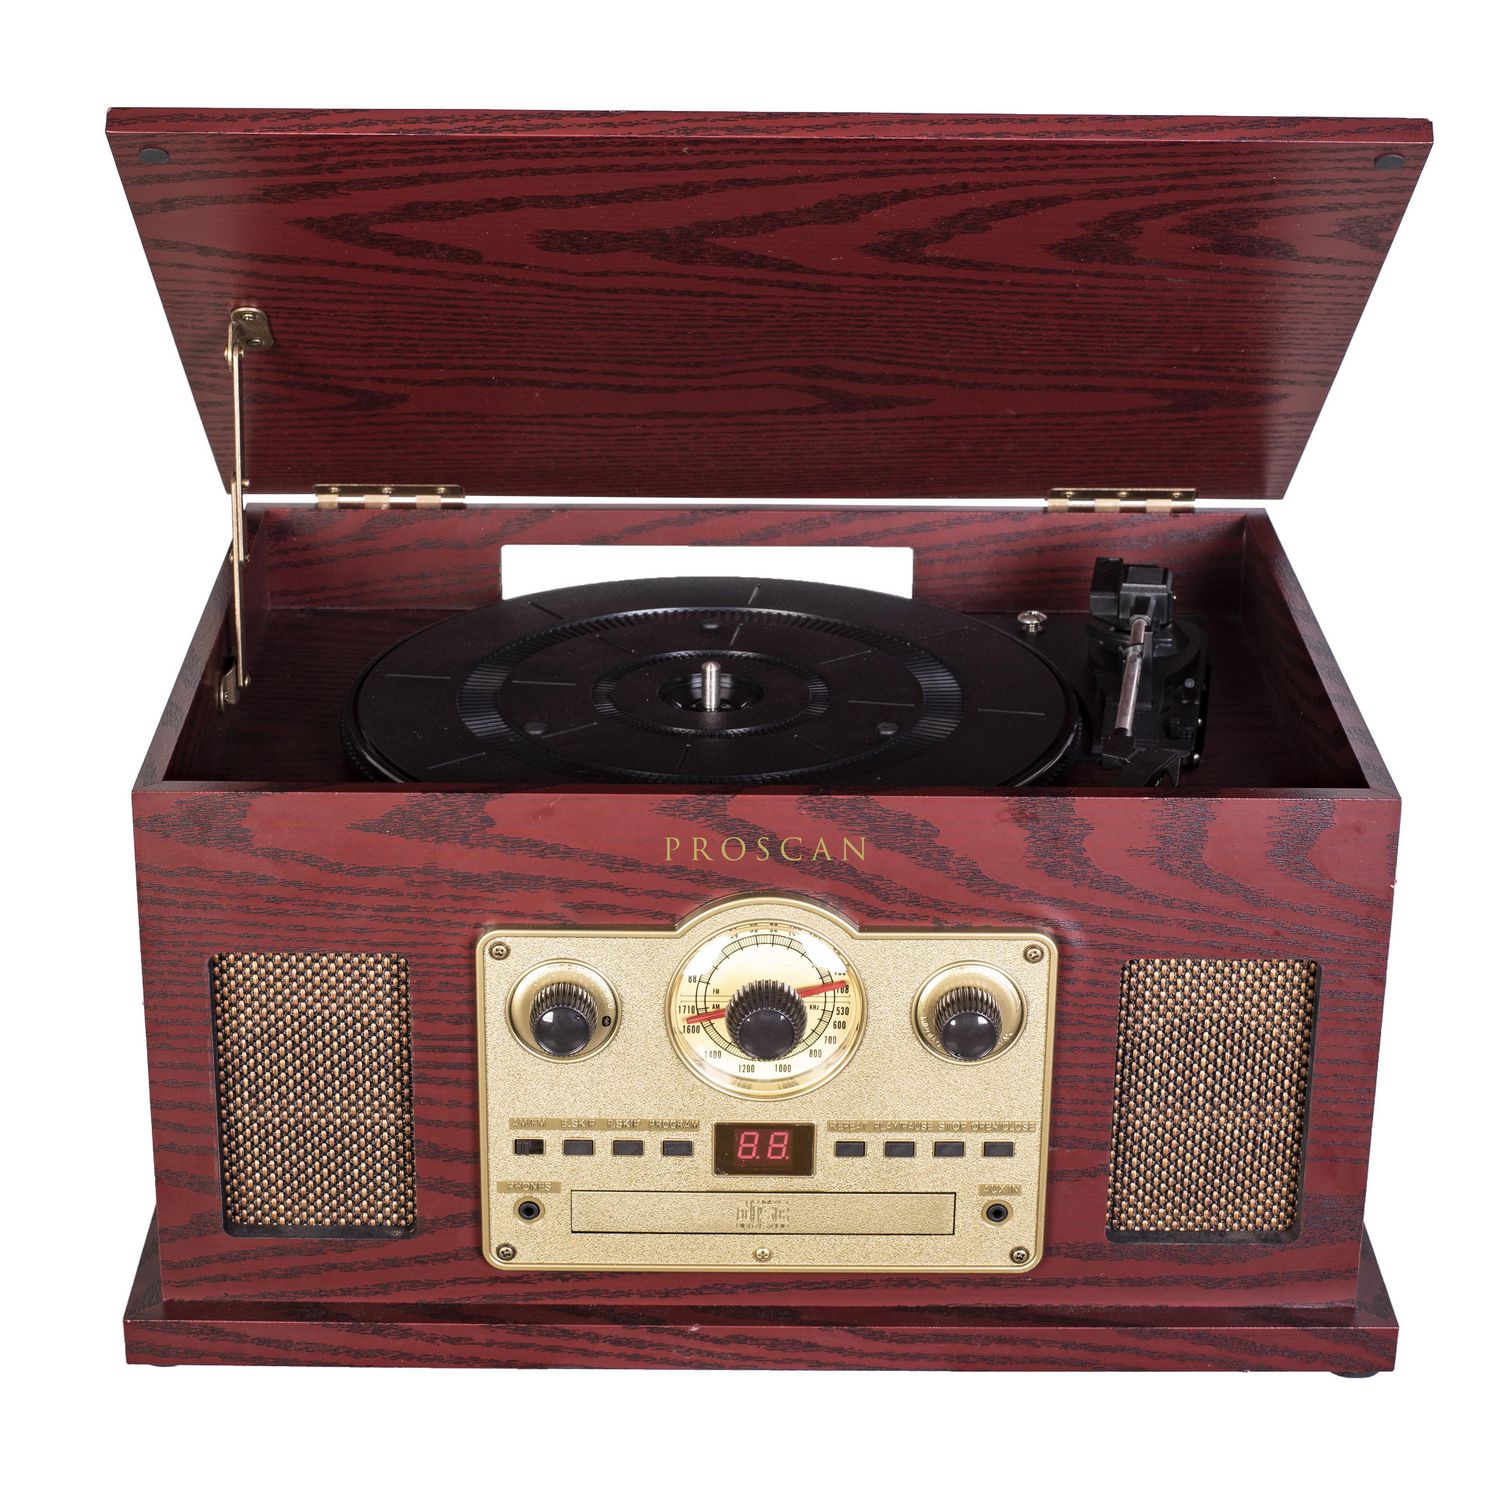 Proscan 6-in-1 Nostalgic Bluetooth Turntable with CD, Cassette, AUX and  AM/FM Radio - Brown 